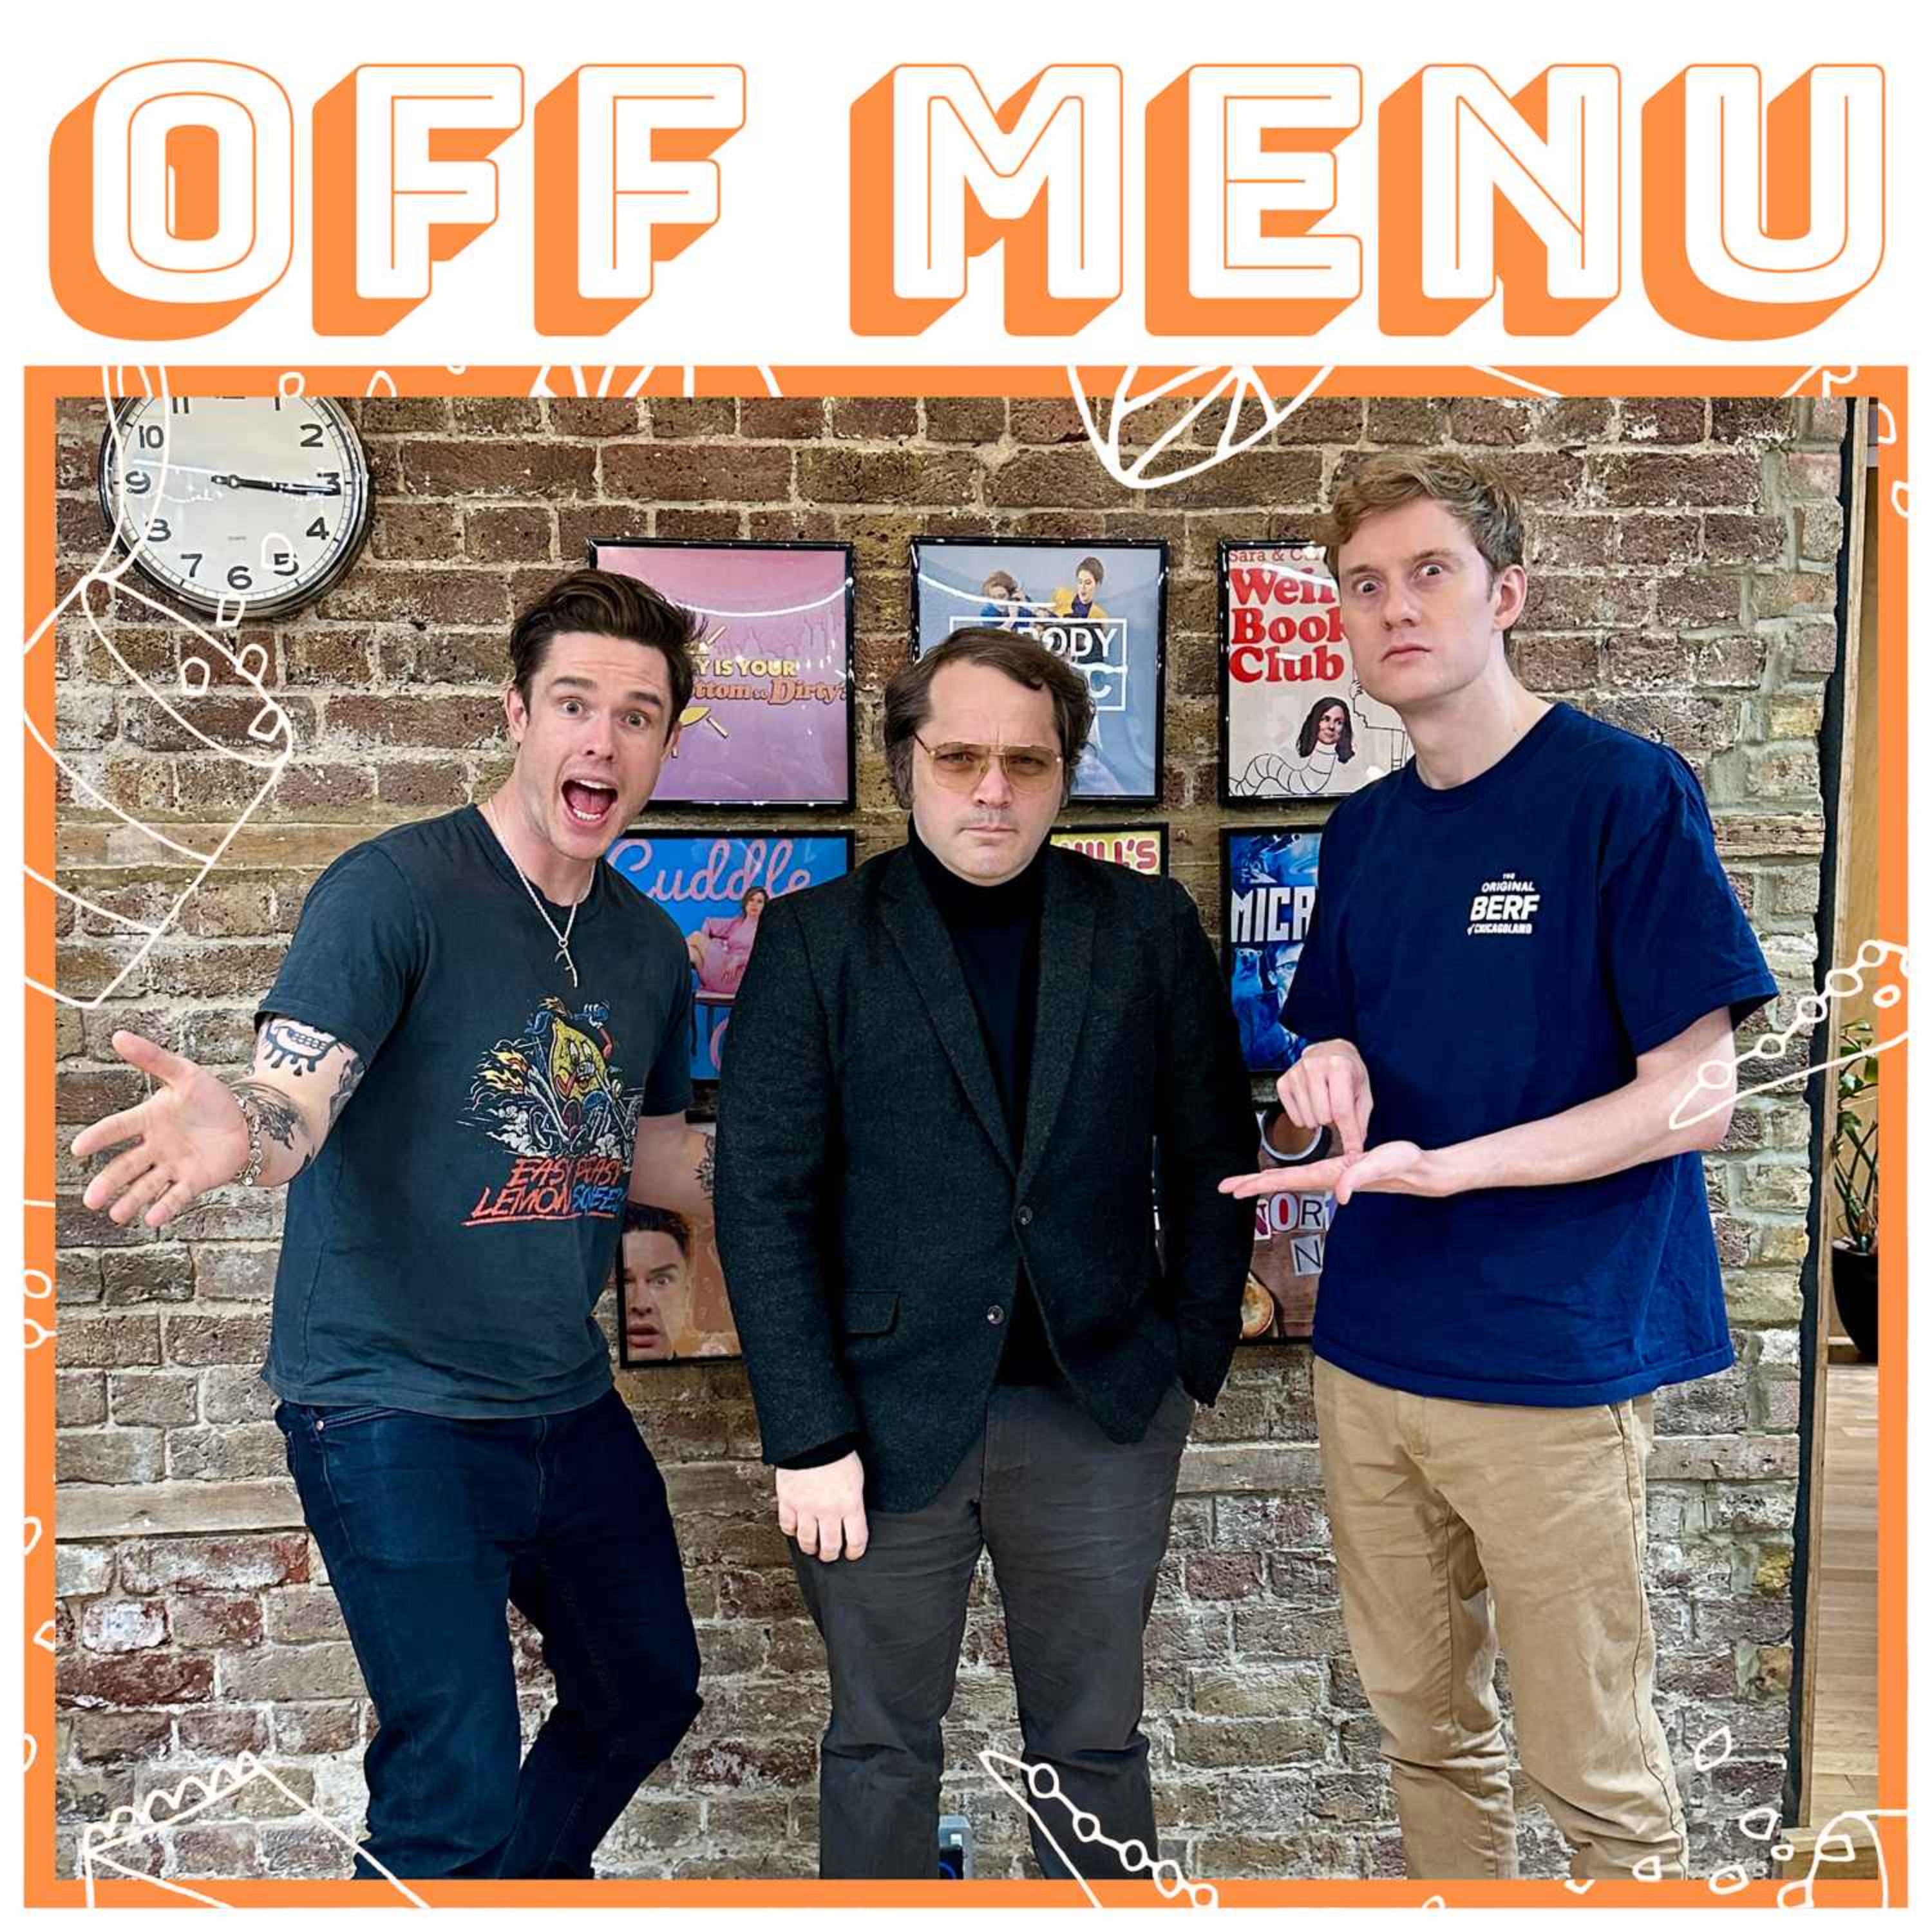 Ep 212: Garth Marenghi - Off Menu with Ed Gamble and James Acaster | Acast